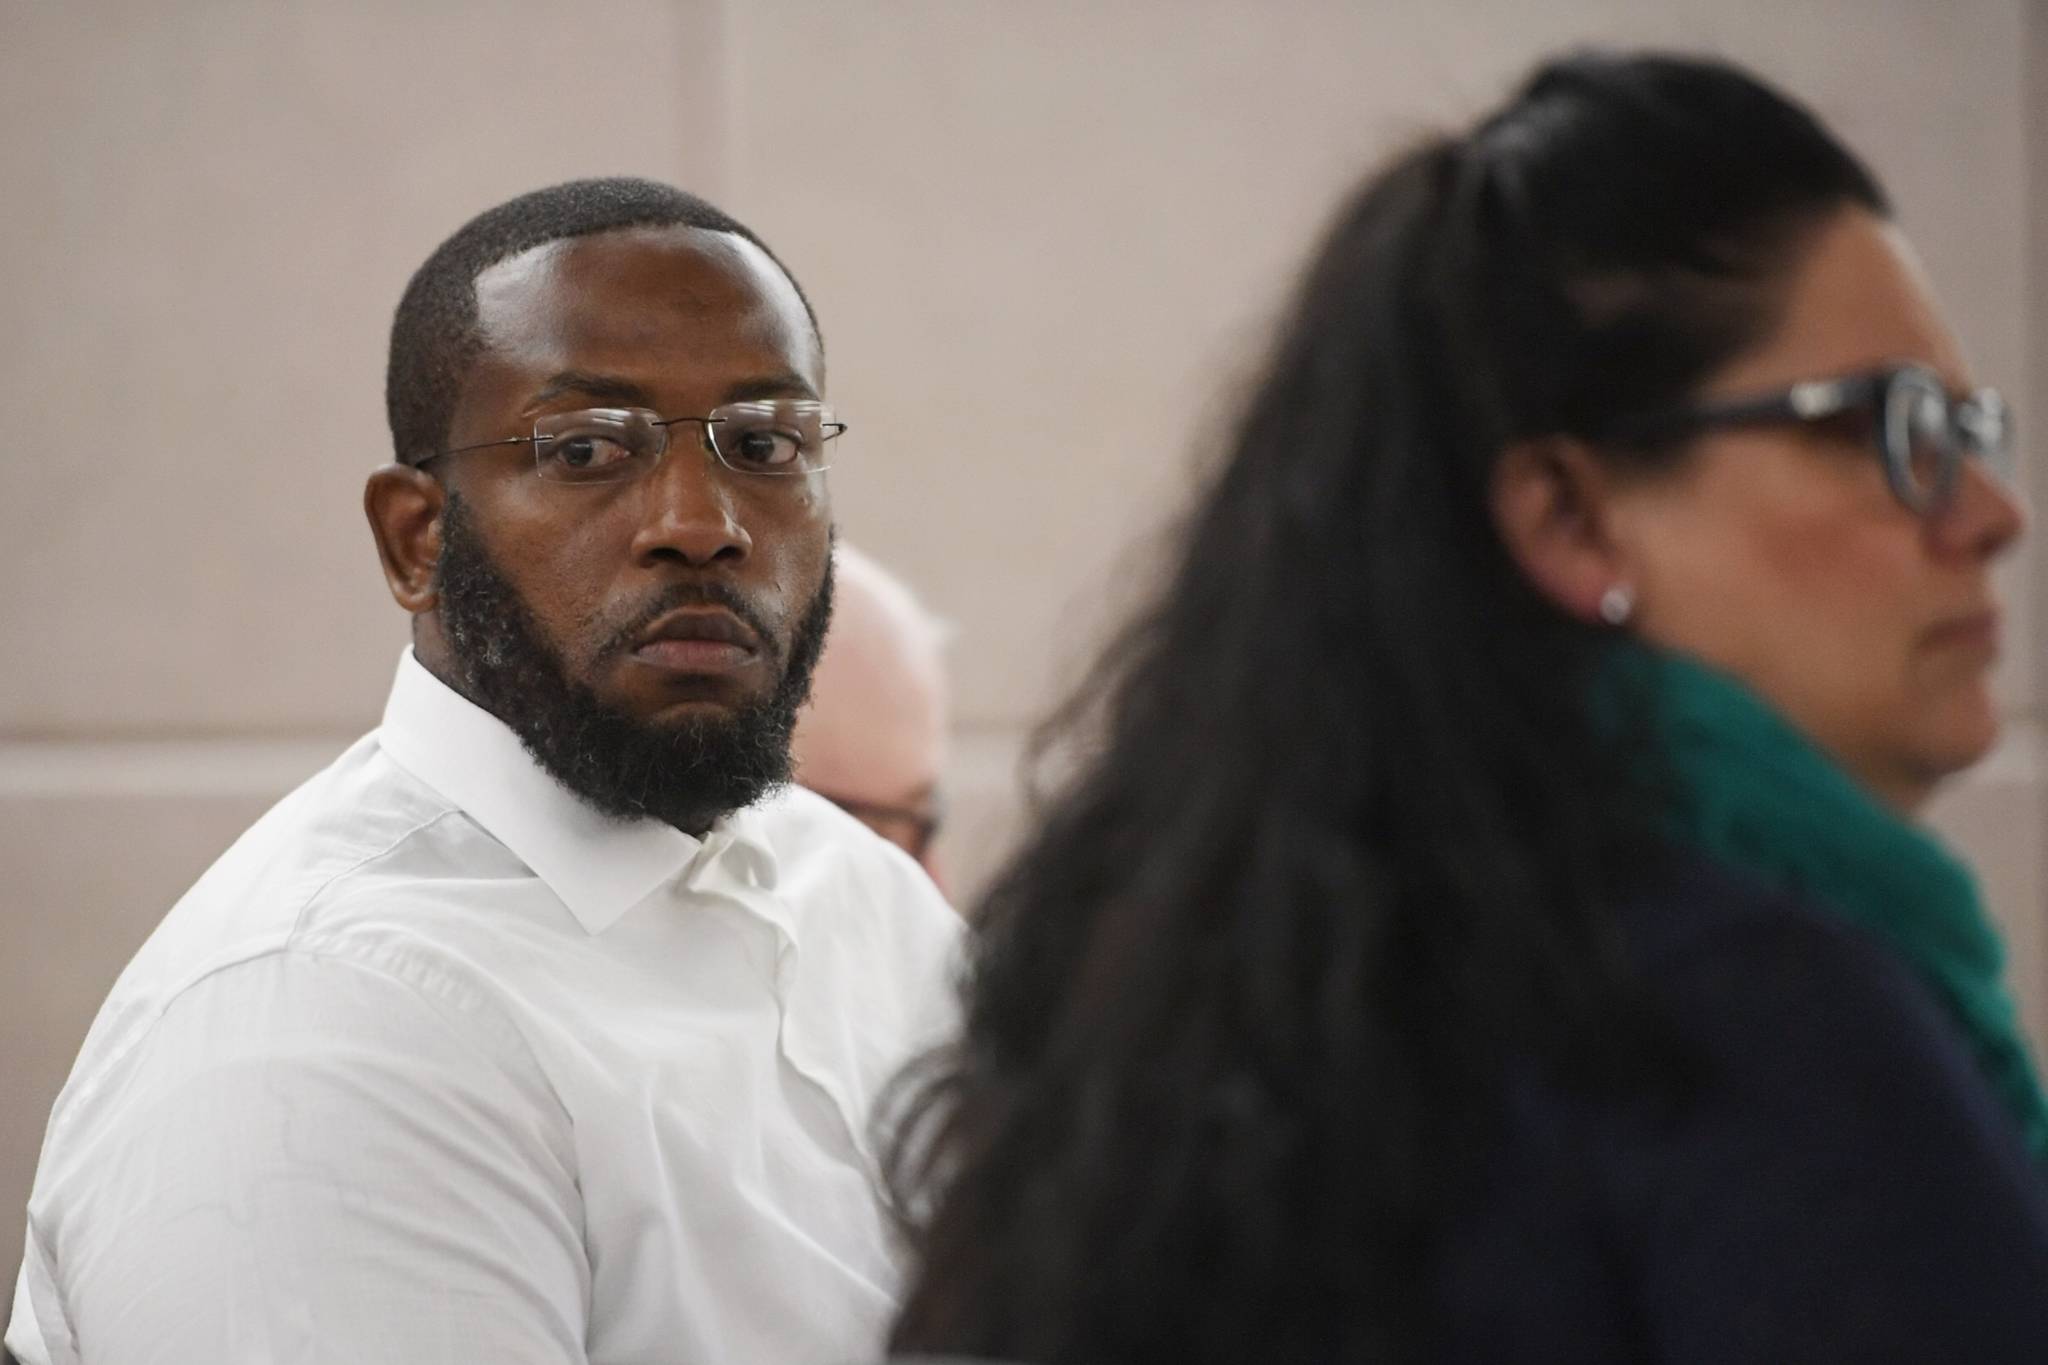 Laron Carlton Graham listens to his attorney, Natasha Norris, in Juneau Superior Court on Tuesday, Sept. 3, 2019, during his trial on two counts of first-degree murder for the Nov. 14, 2015 shooting deaths of 36-year-old Robert H. Meireis and 34-year-old Elizabeth K. Tonsmeire. (Michael Penn | Juneau Empire)